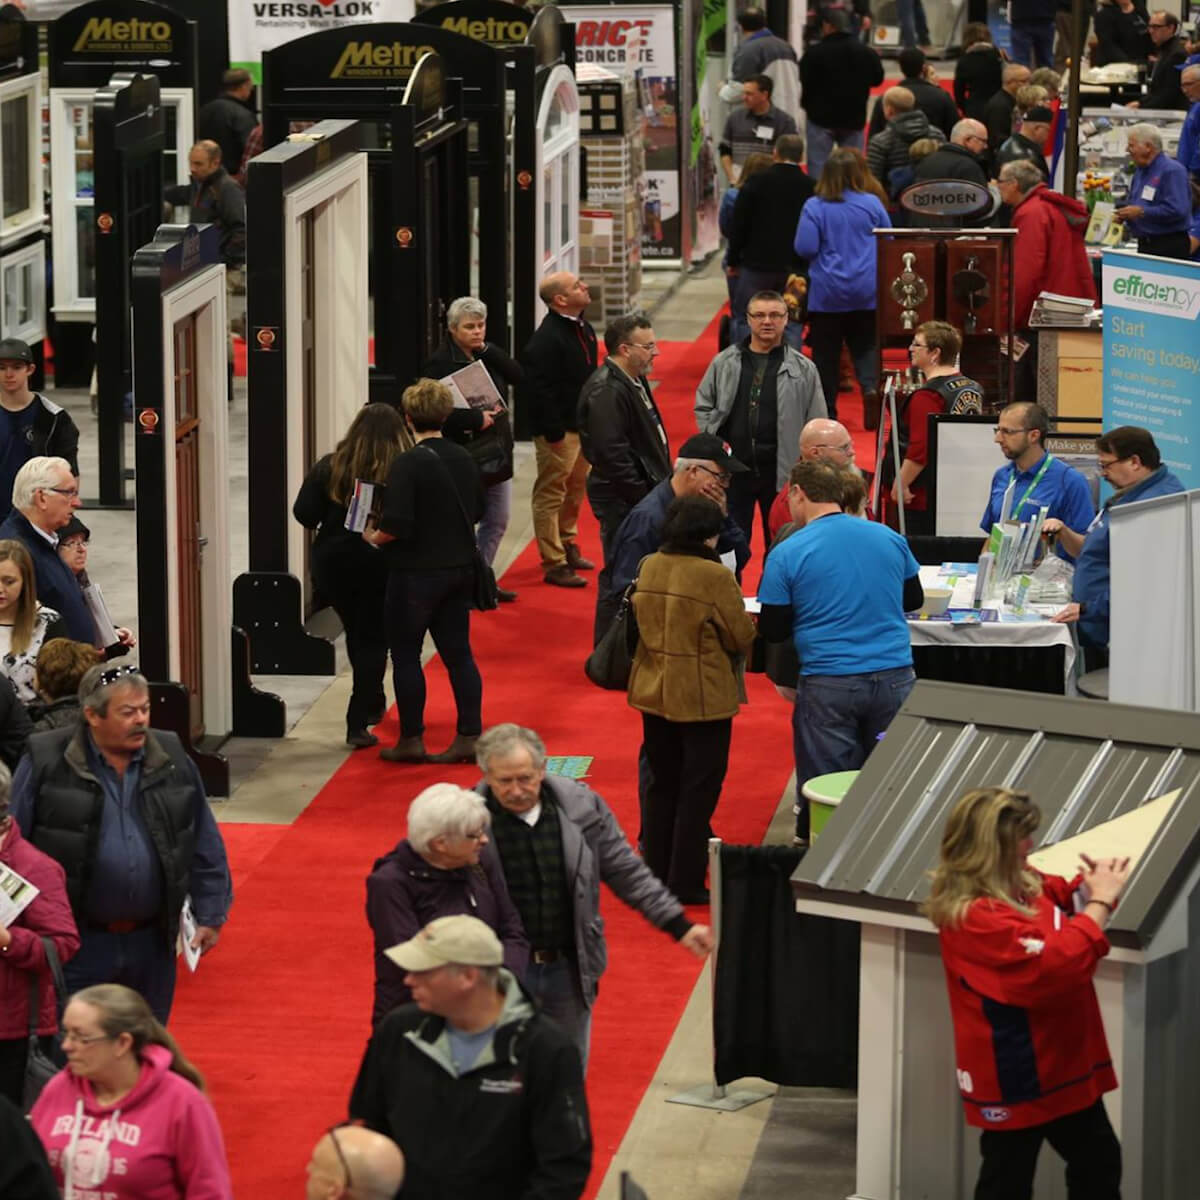 The Ideal Home Show (Halifax Exhibition Center)